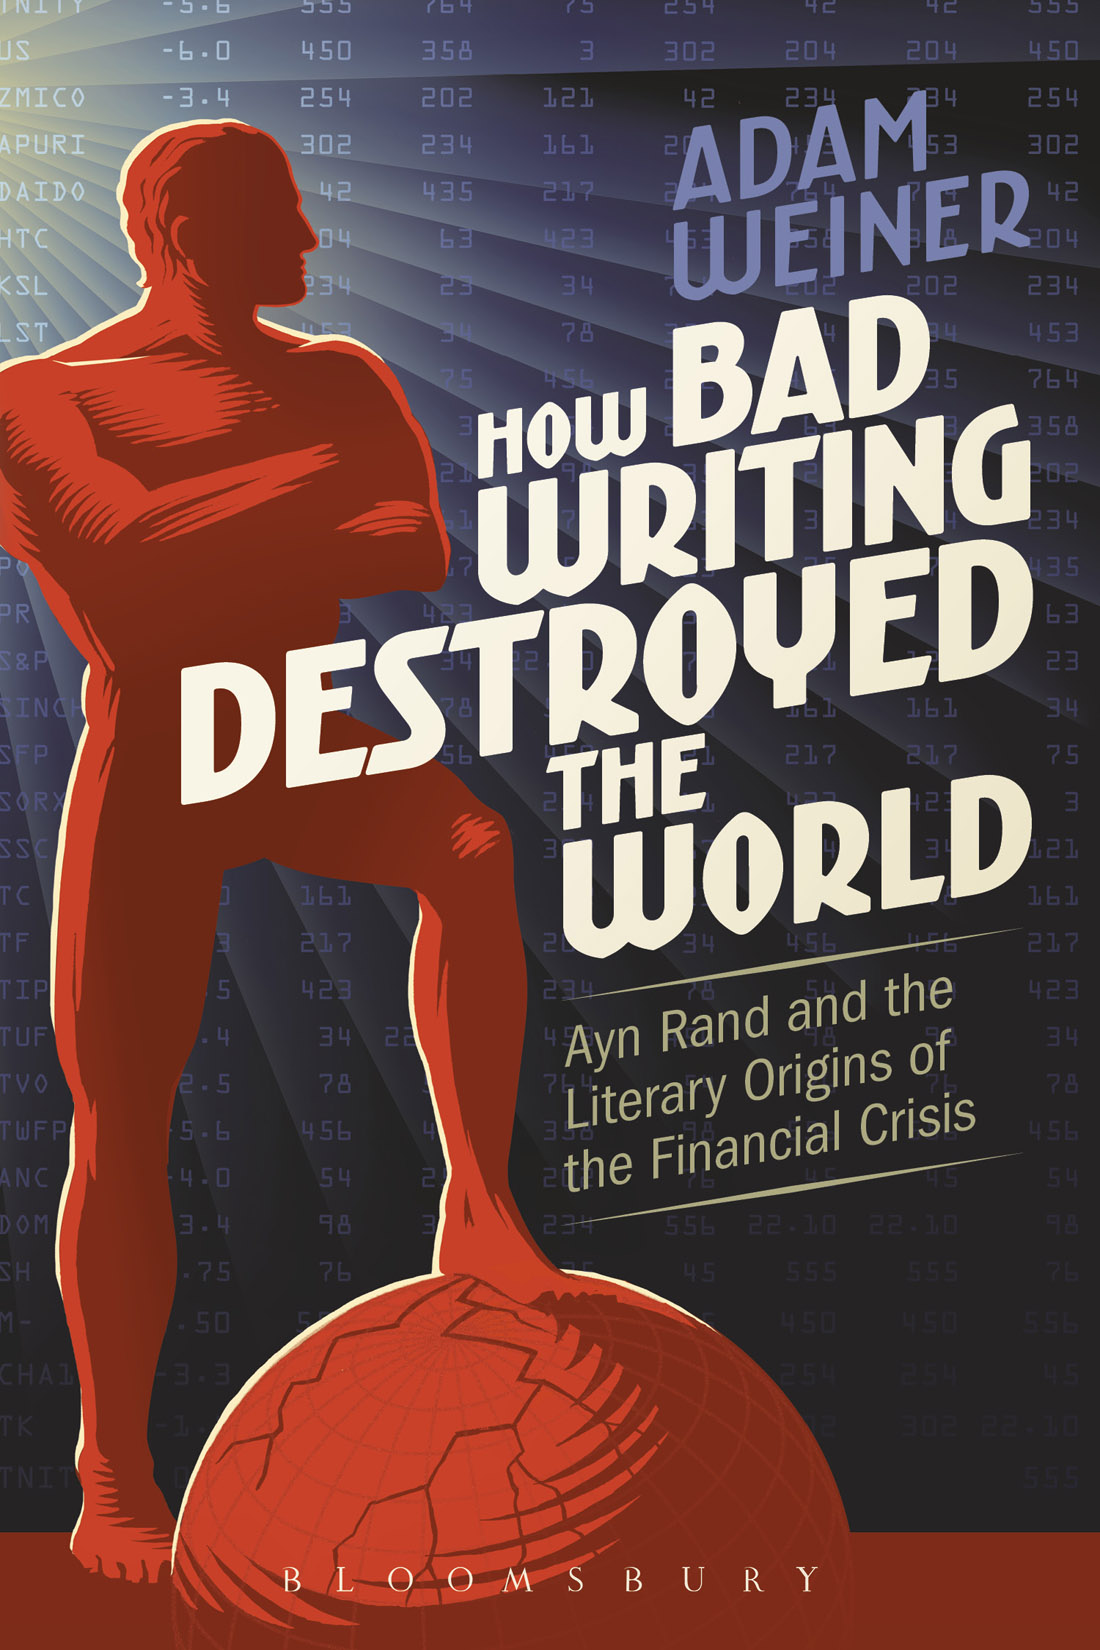 How Bad Writing Destroyed the World: Ayn Rand and the Literary Origins of the Financial Crisis